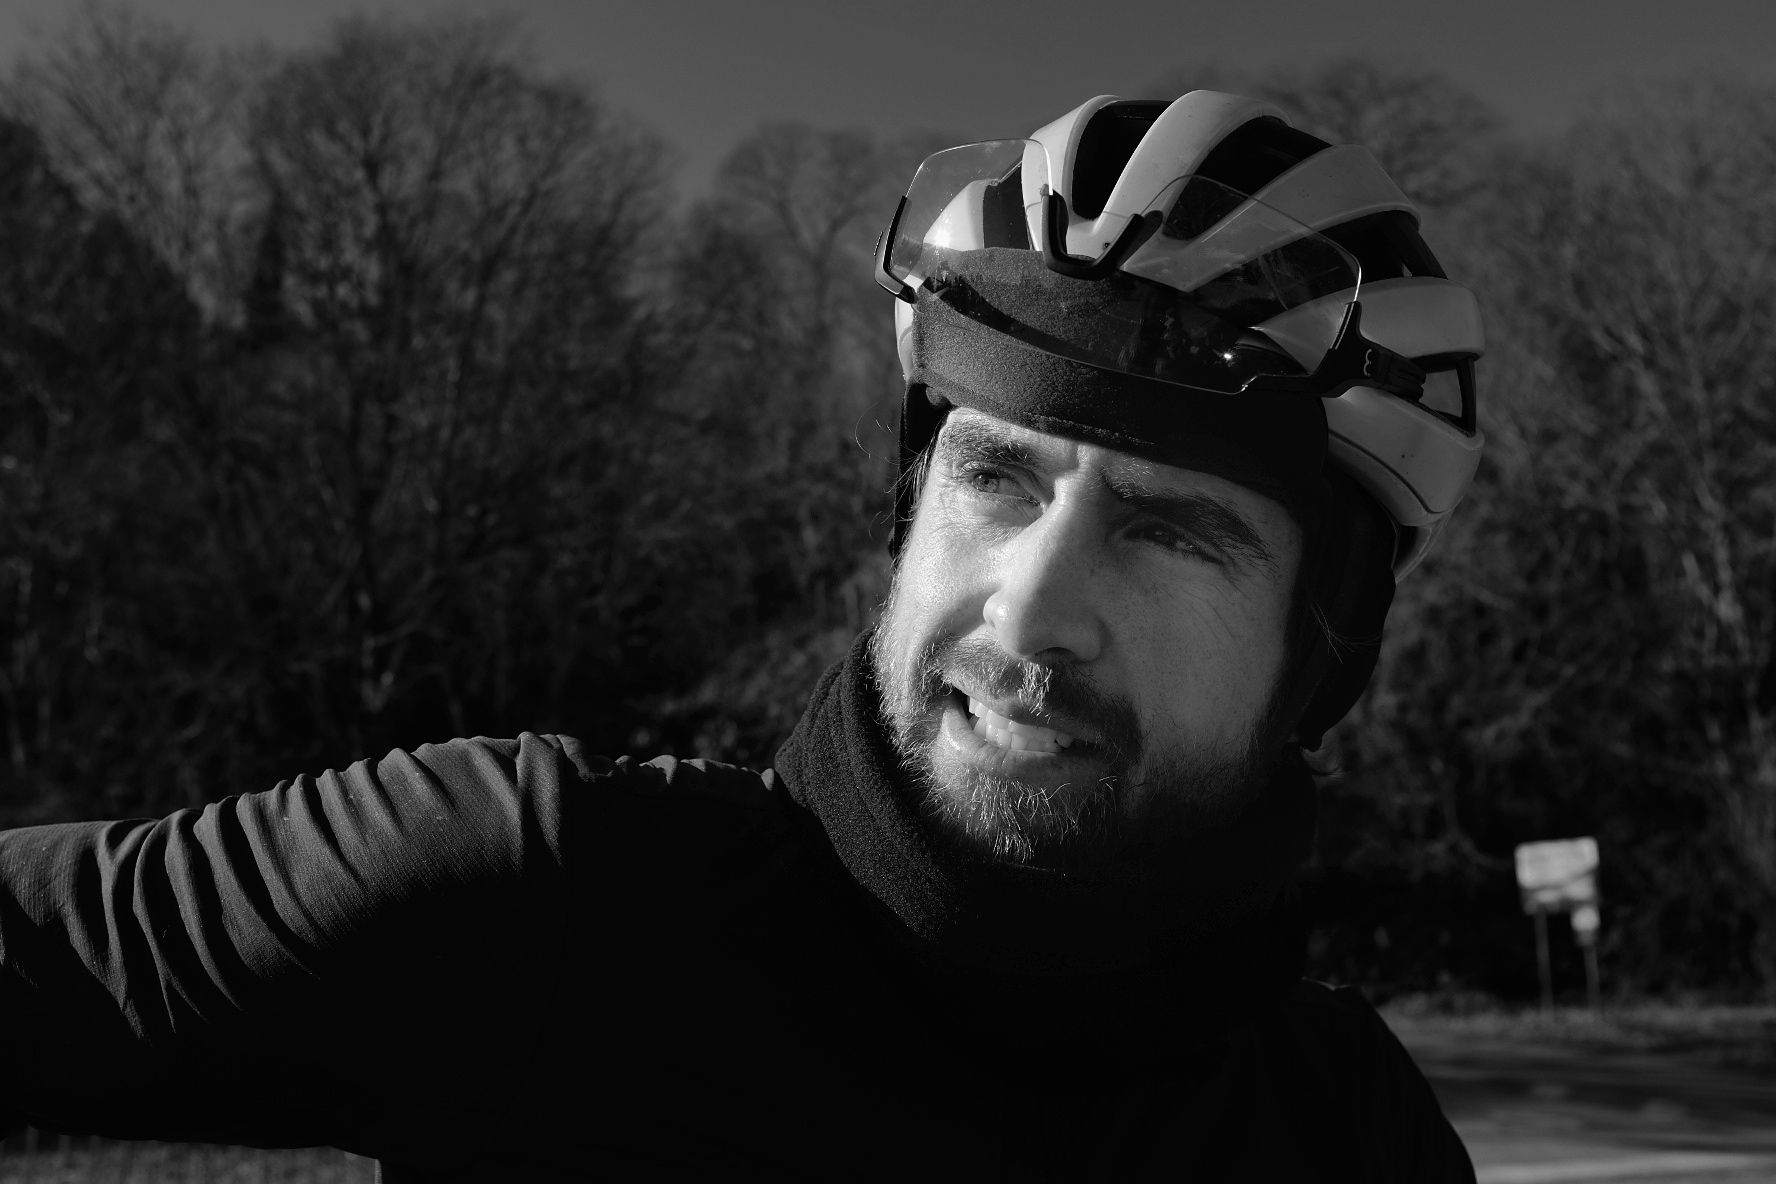 Meet the Man Cycling 1 Million Meters of Elevation for Mental Health